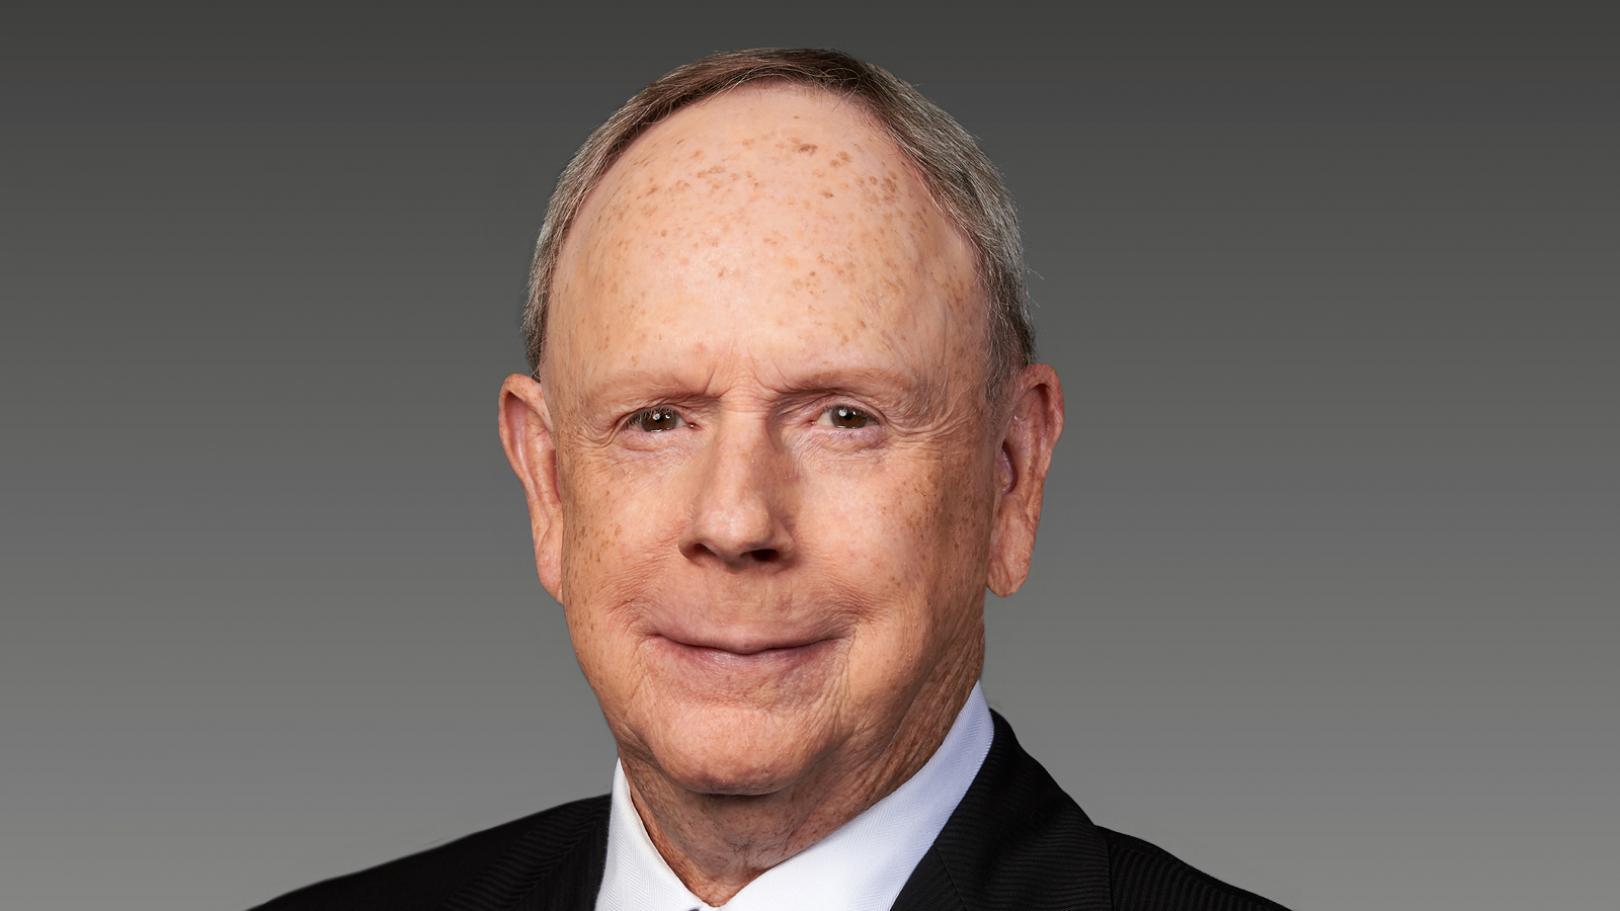 James A. Skinner, Board of Directors of Walgreens Boots Alliance, Inc.